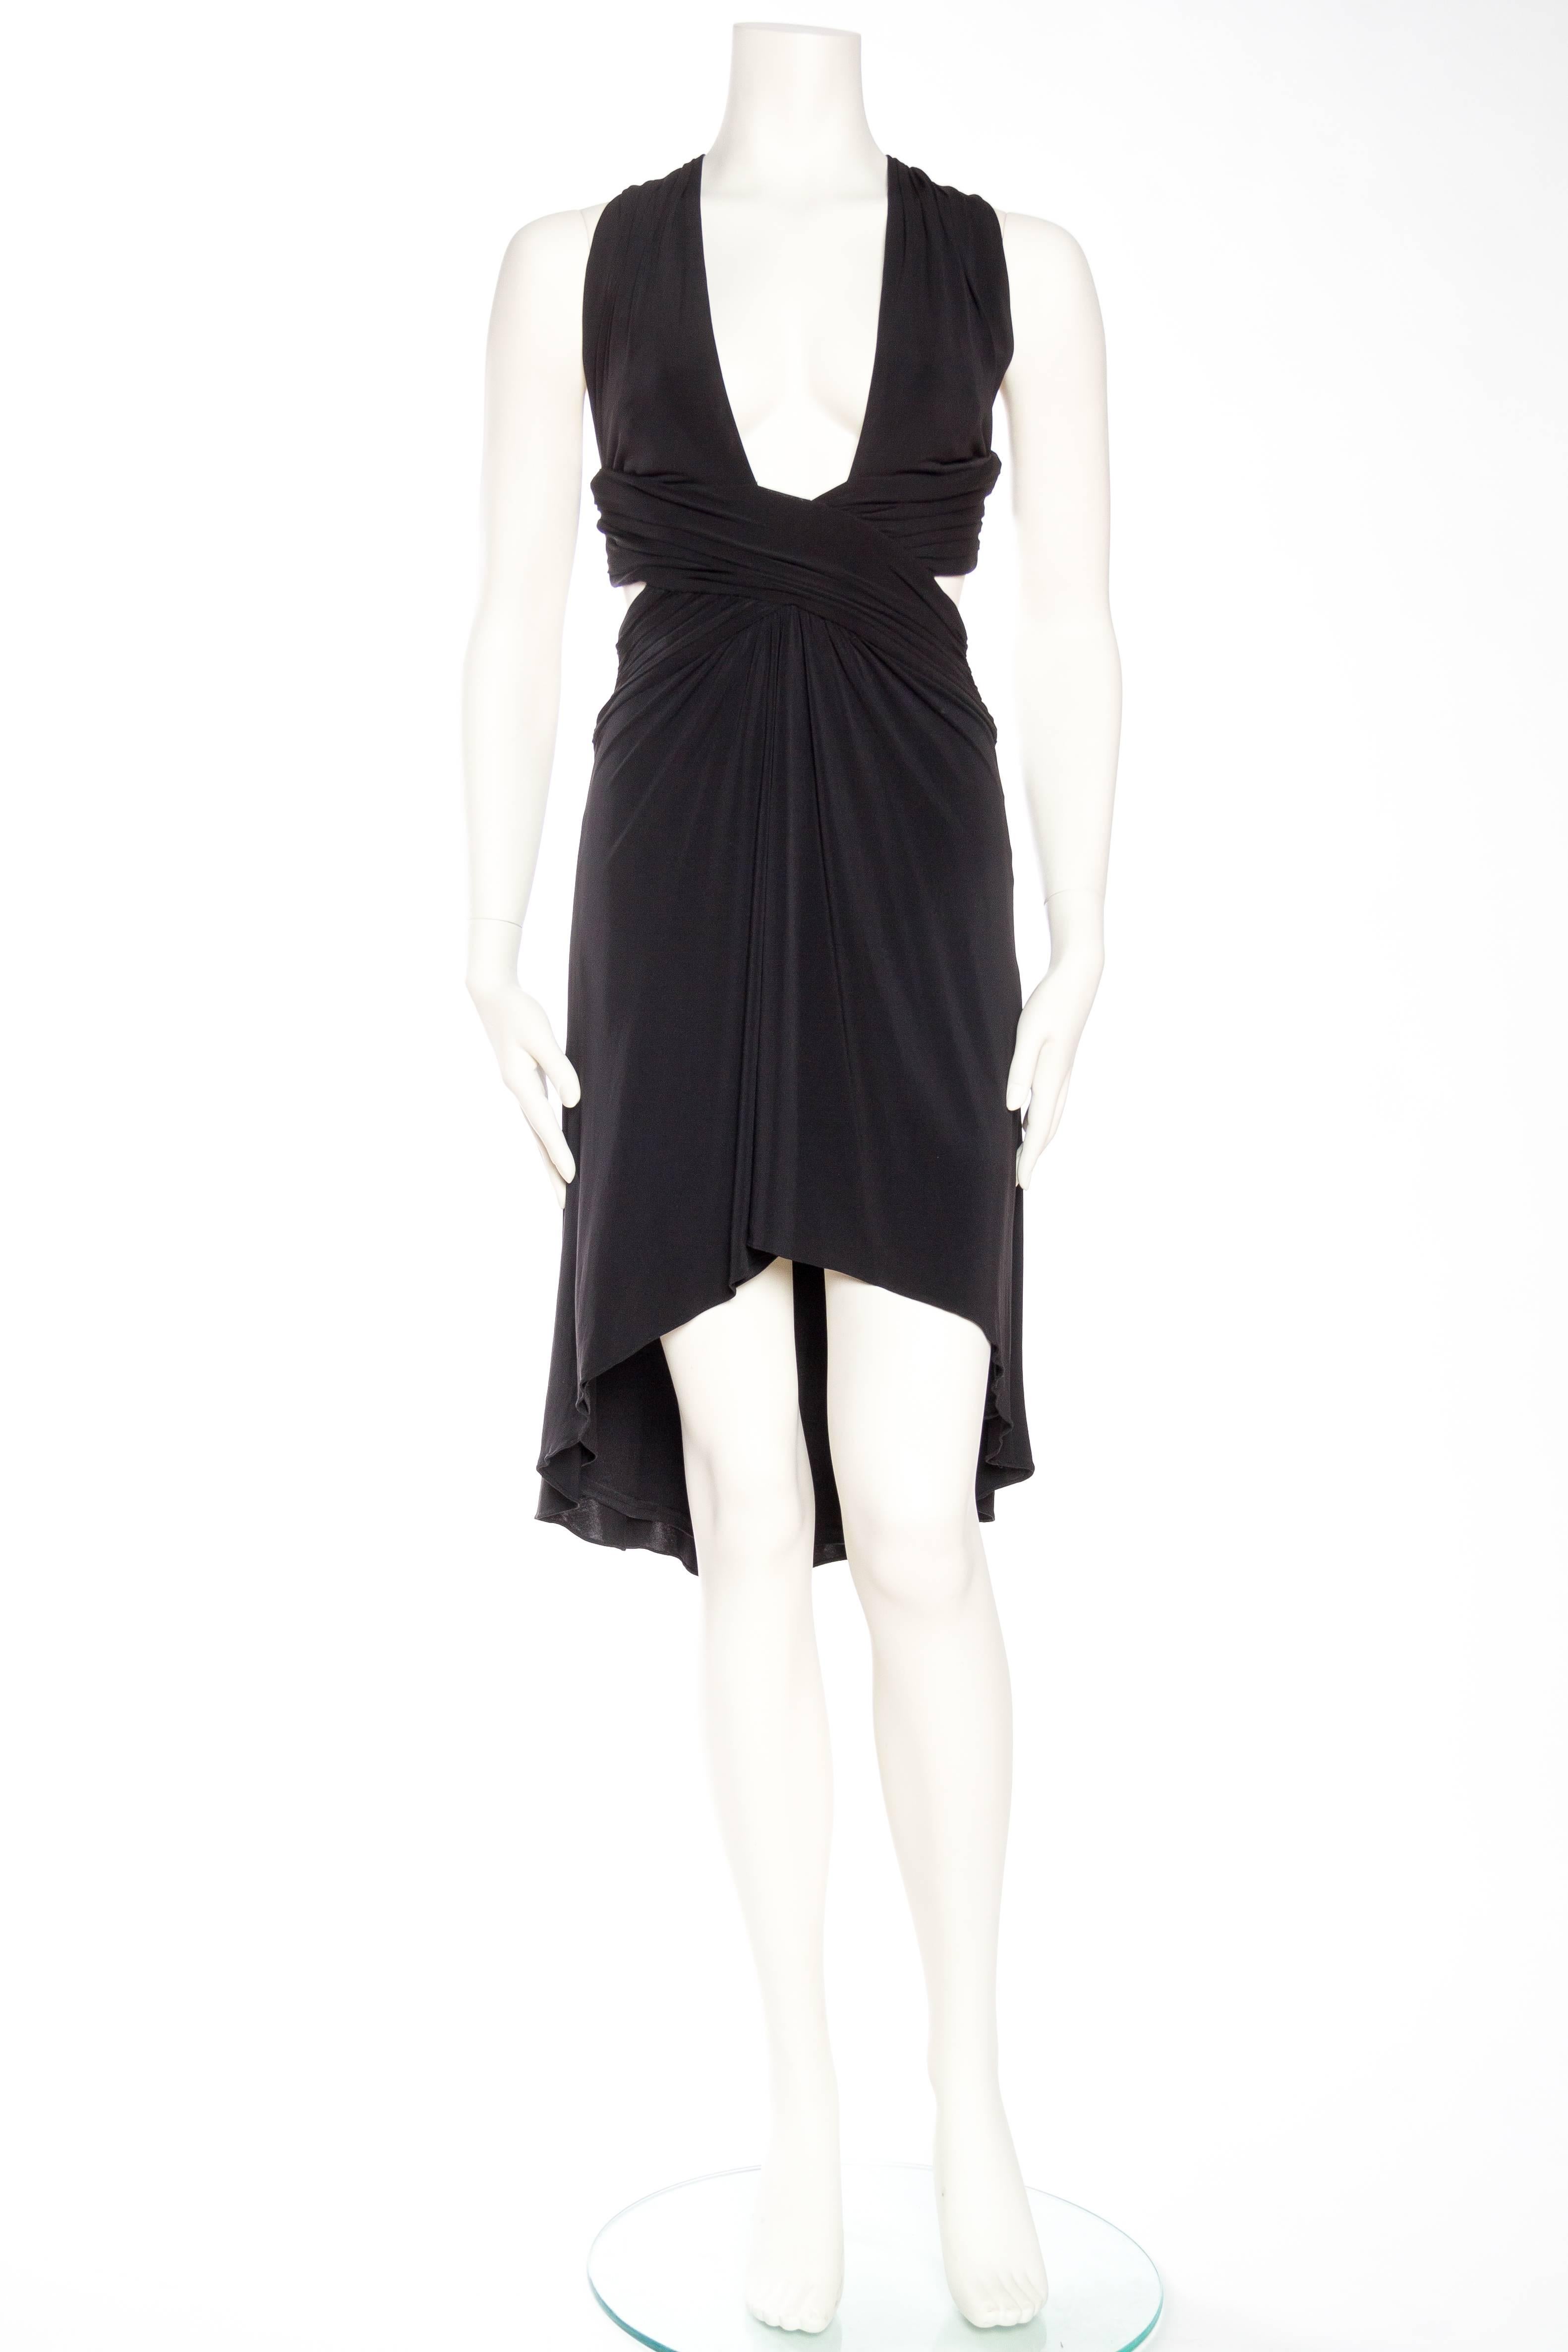 Gianni Versace Slinky Jersey Backless LBD  In Excellent Condition In New York, NY